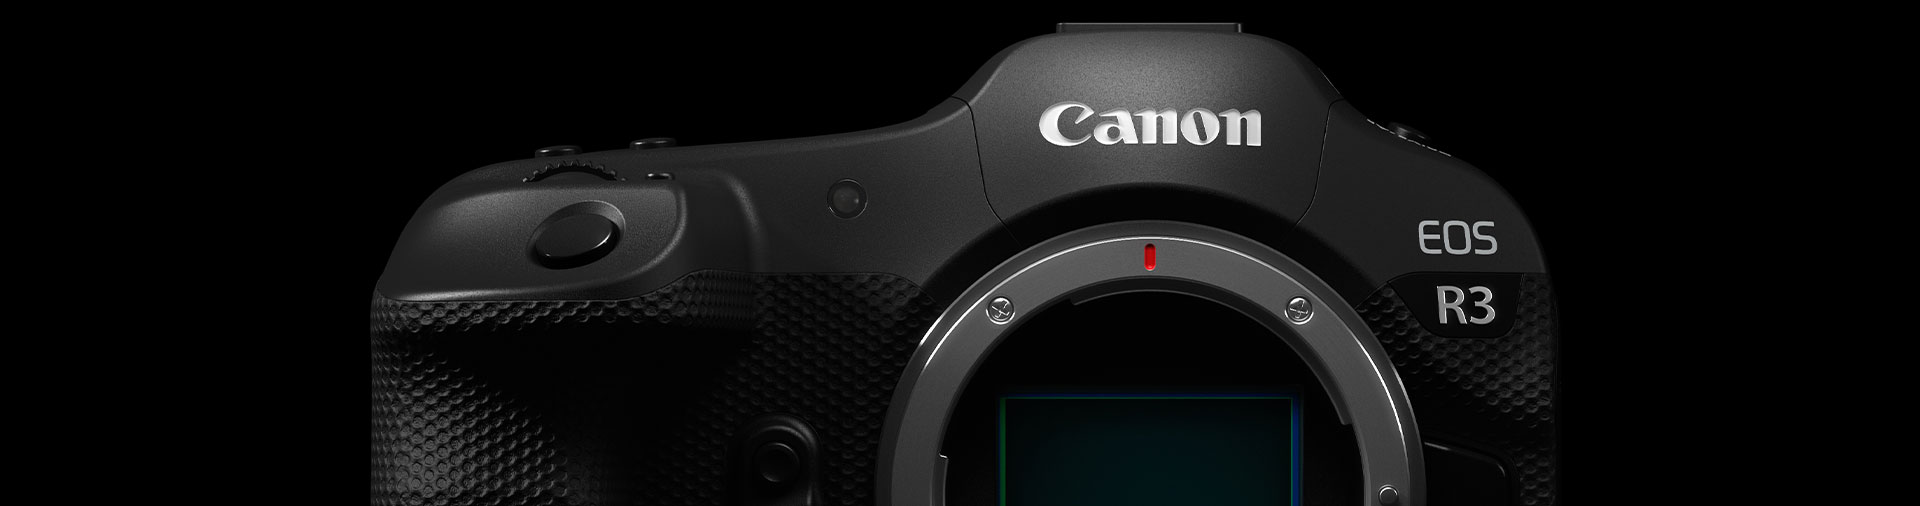 canon-eos-r3-against-black-background